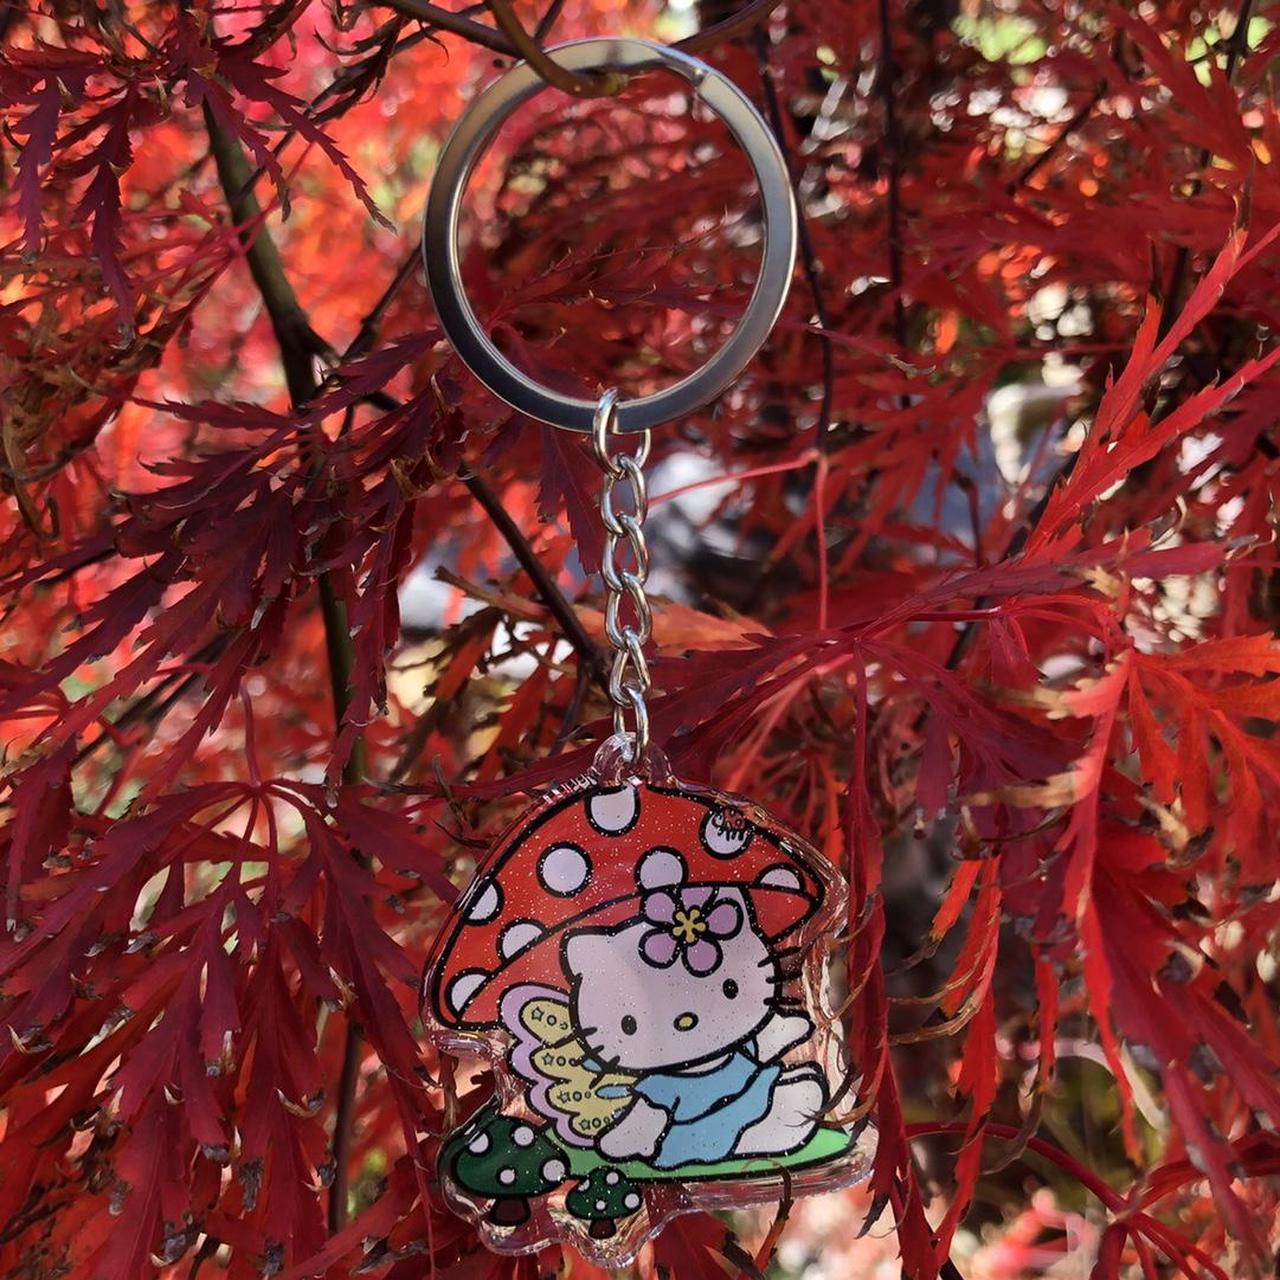 Product Image 1 - -Hello kitty keychain
-All Sales Are